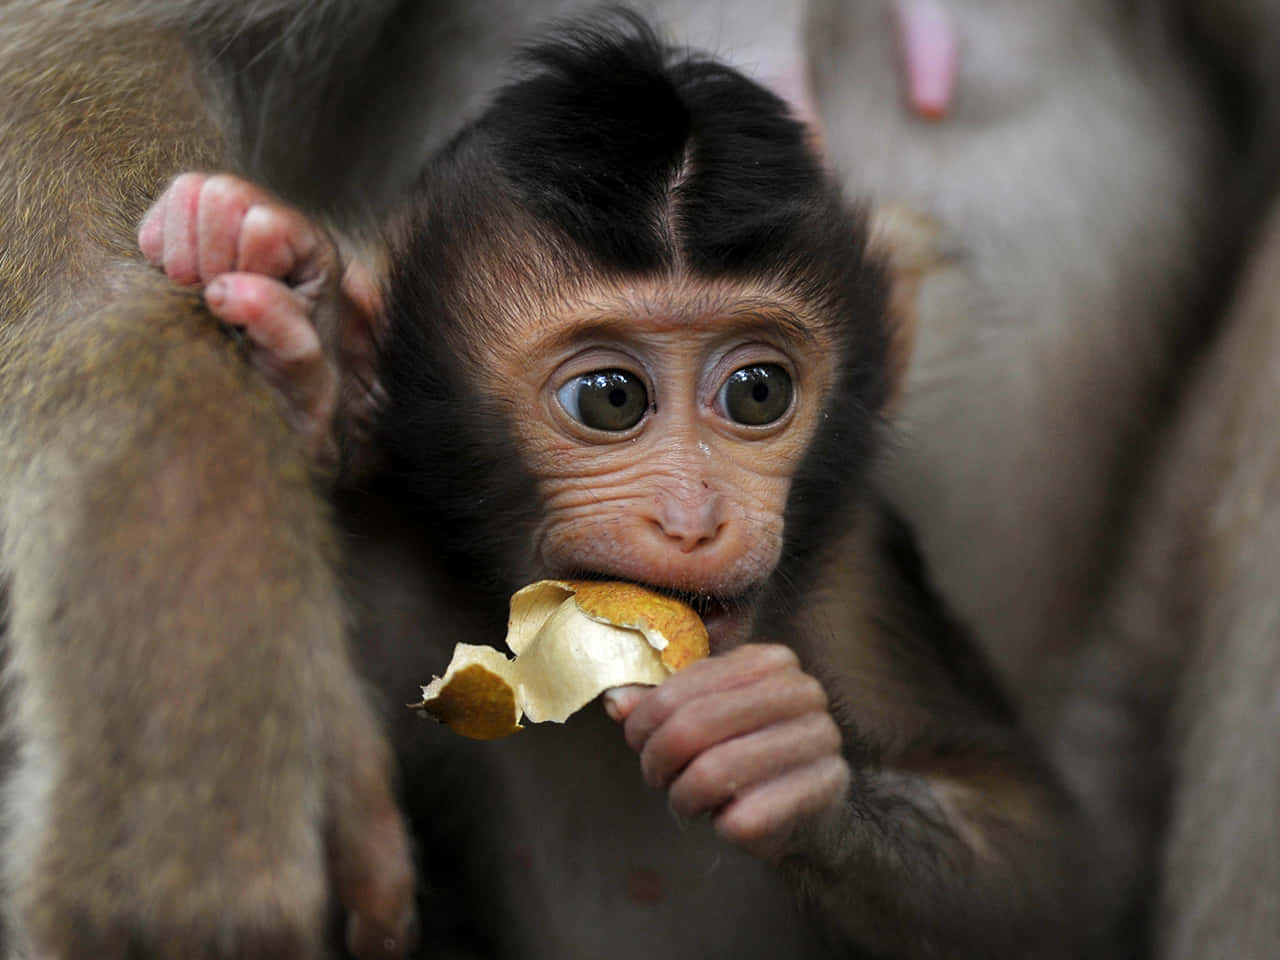 A beautiful baby monkey looking up in wonder